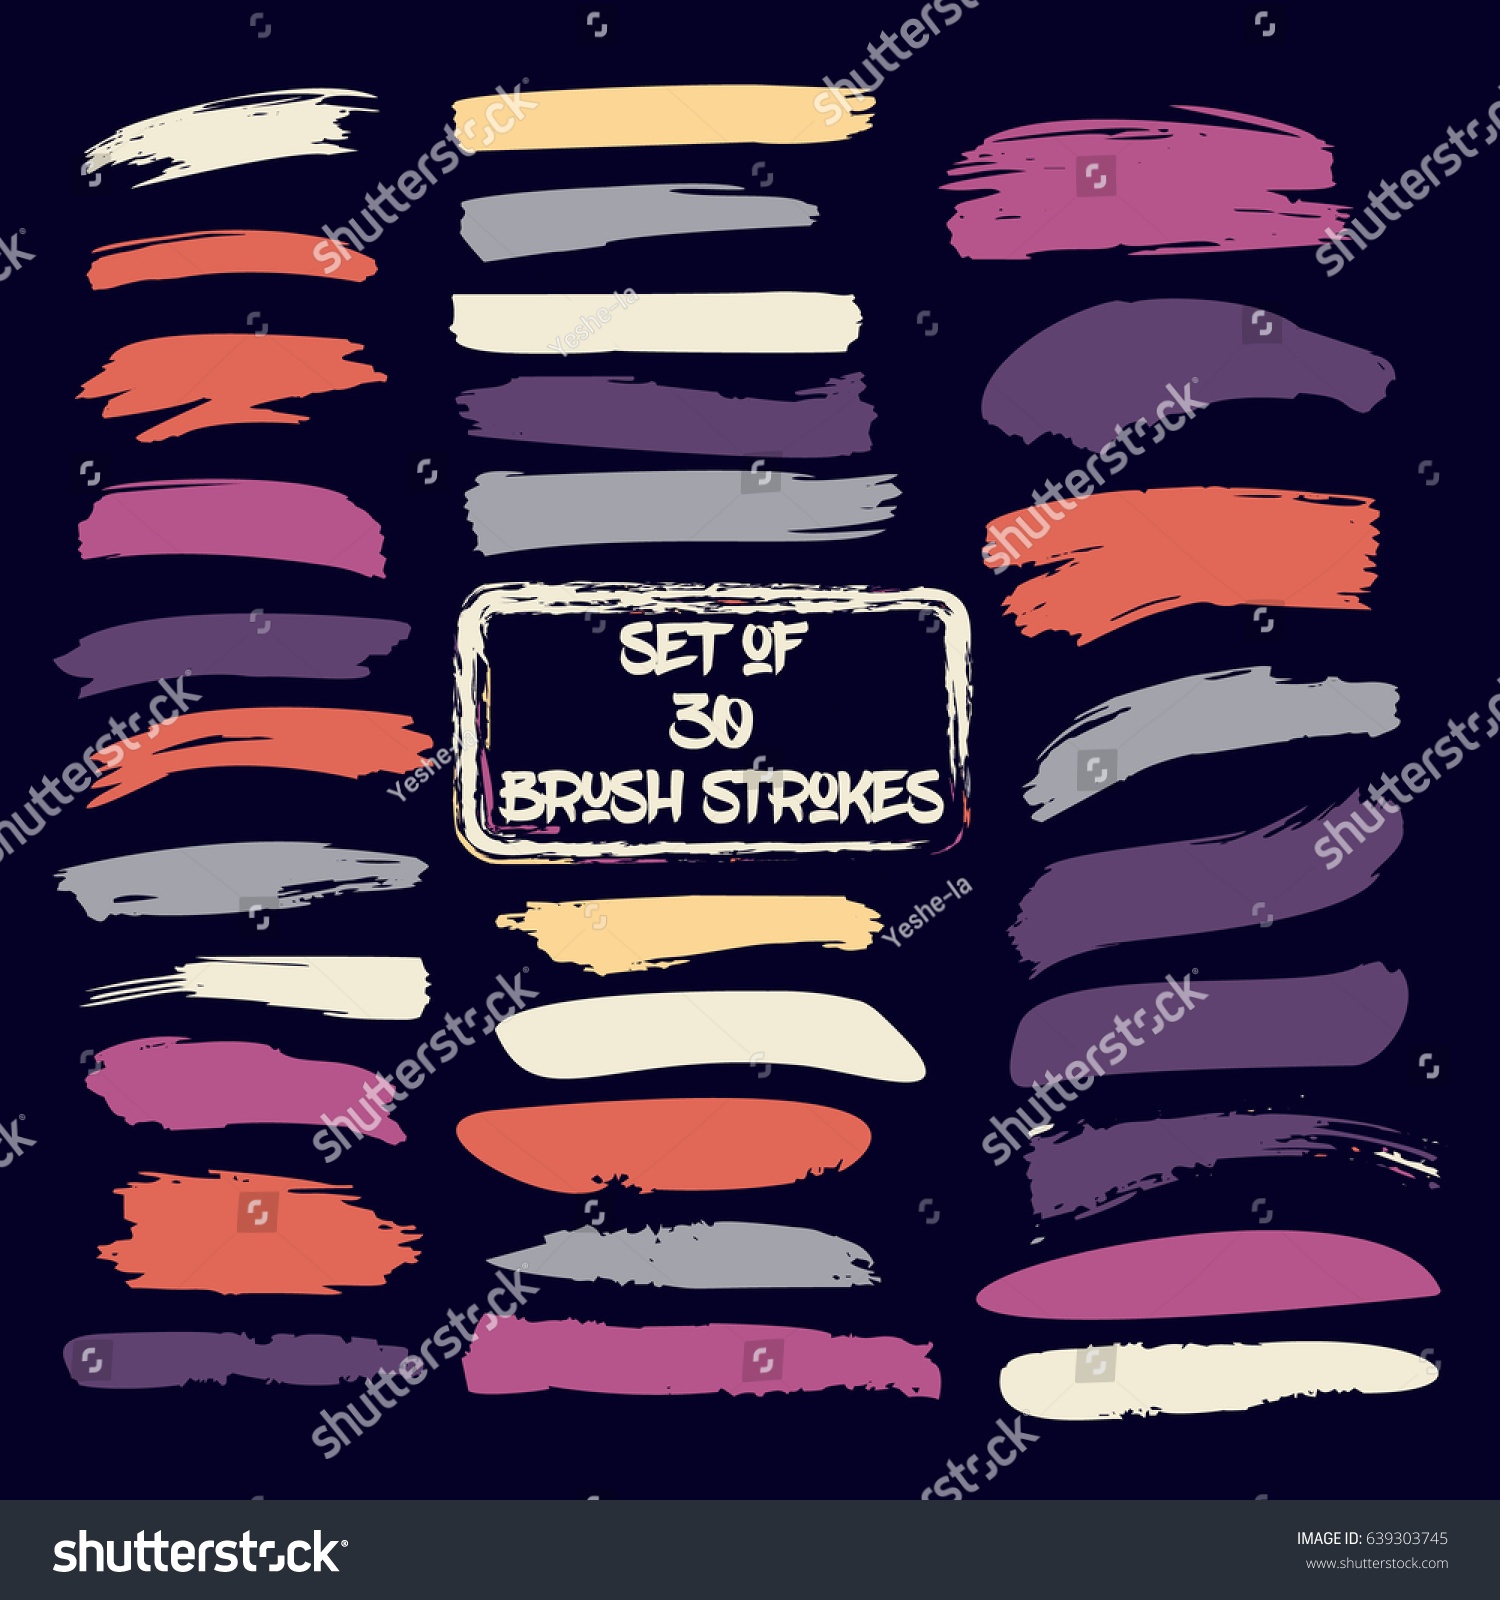 SVG of Set of thirty trendy red, yellow, purple, and pink vector brush strokes or backgrounds. Hand painted ink brush strokes, brushes, and lines. Isolated dirty grunge artistic design elements.  svg